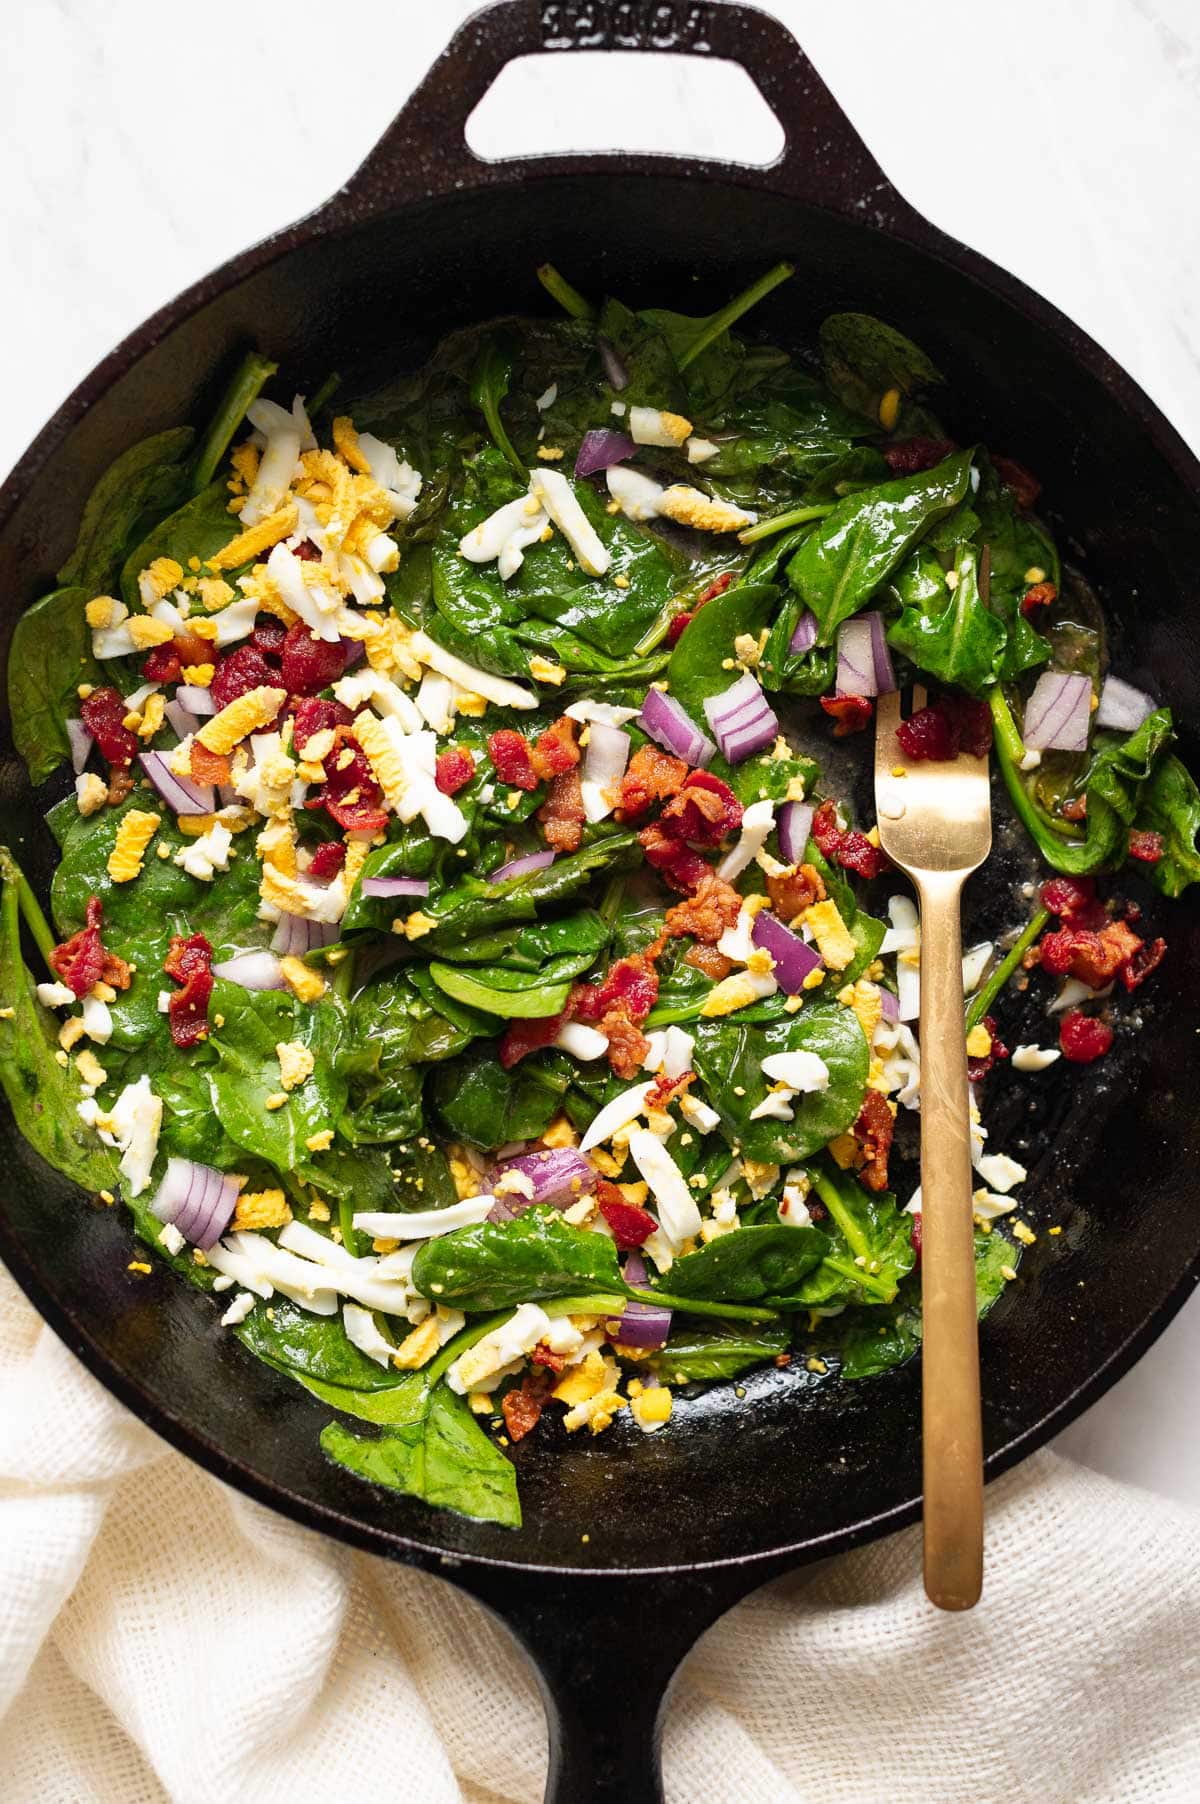 Wilted spinach salad recipe with grated hard boiled eggs, bacon bits and chopped red onion.